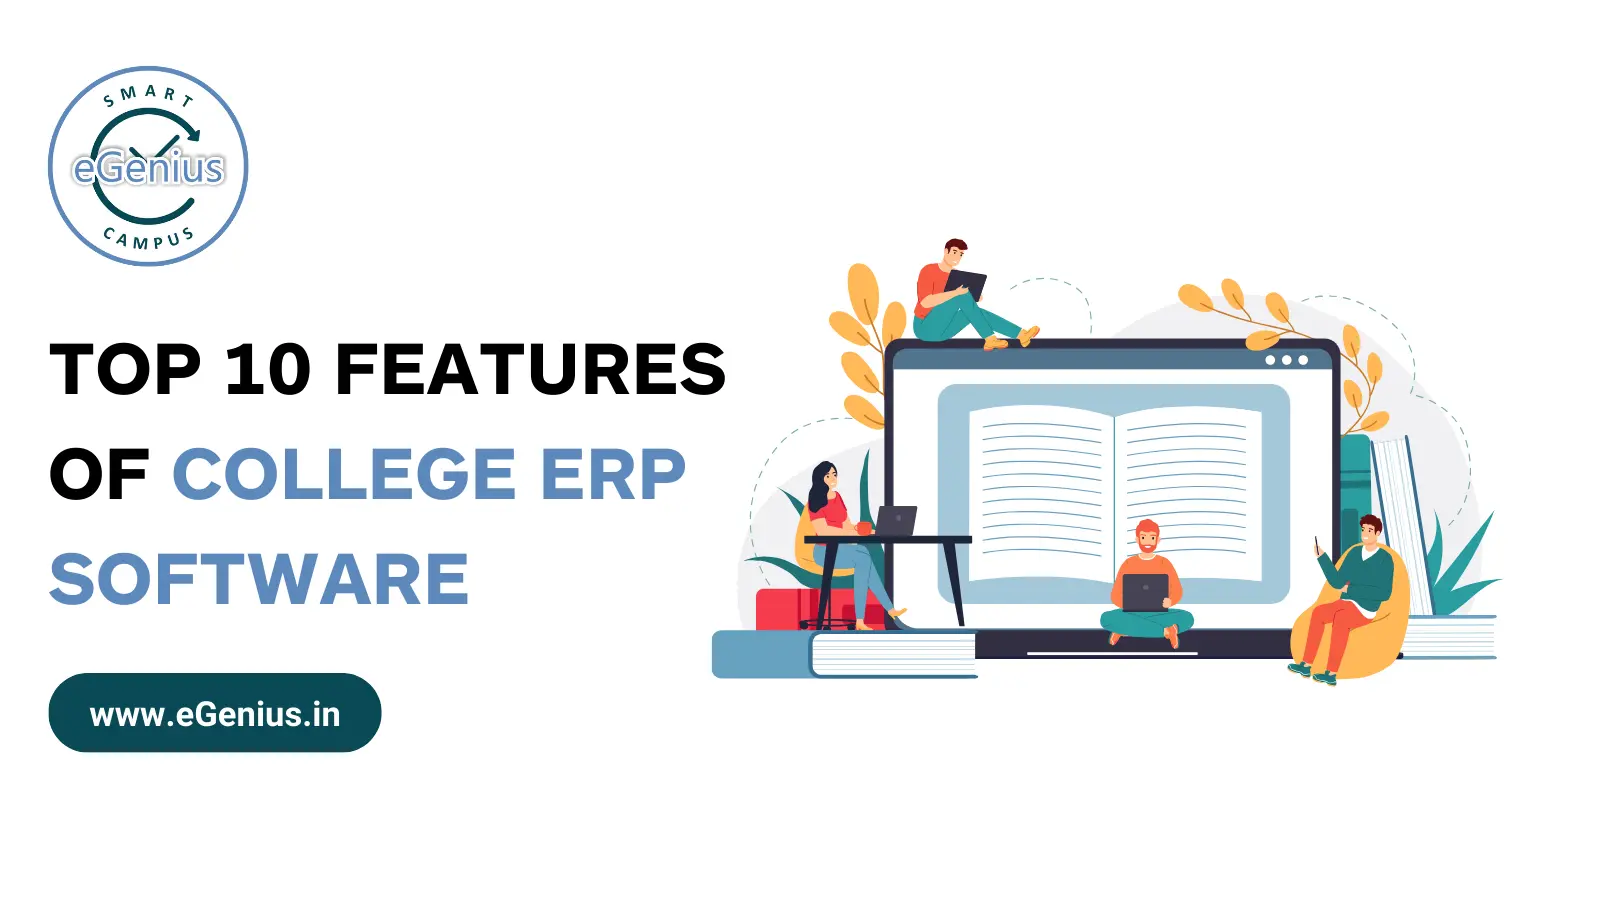 Top 10 Features of College ERP Software